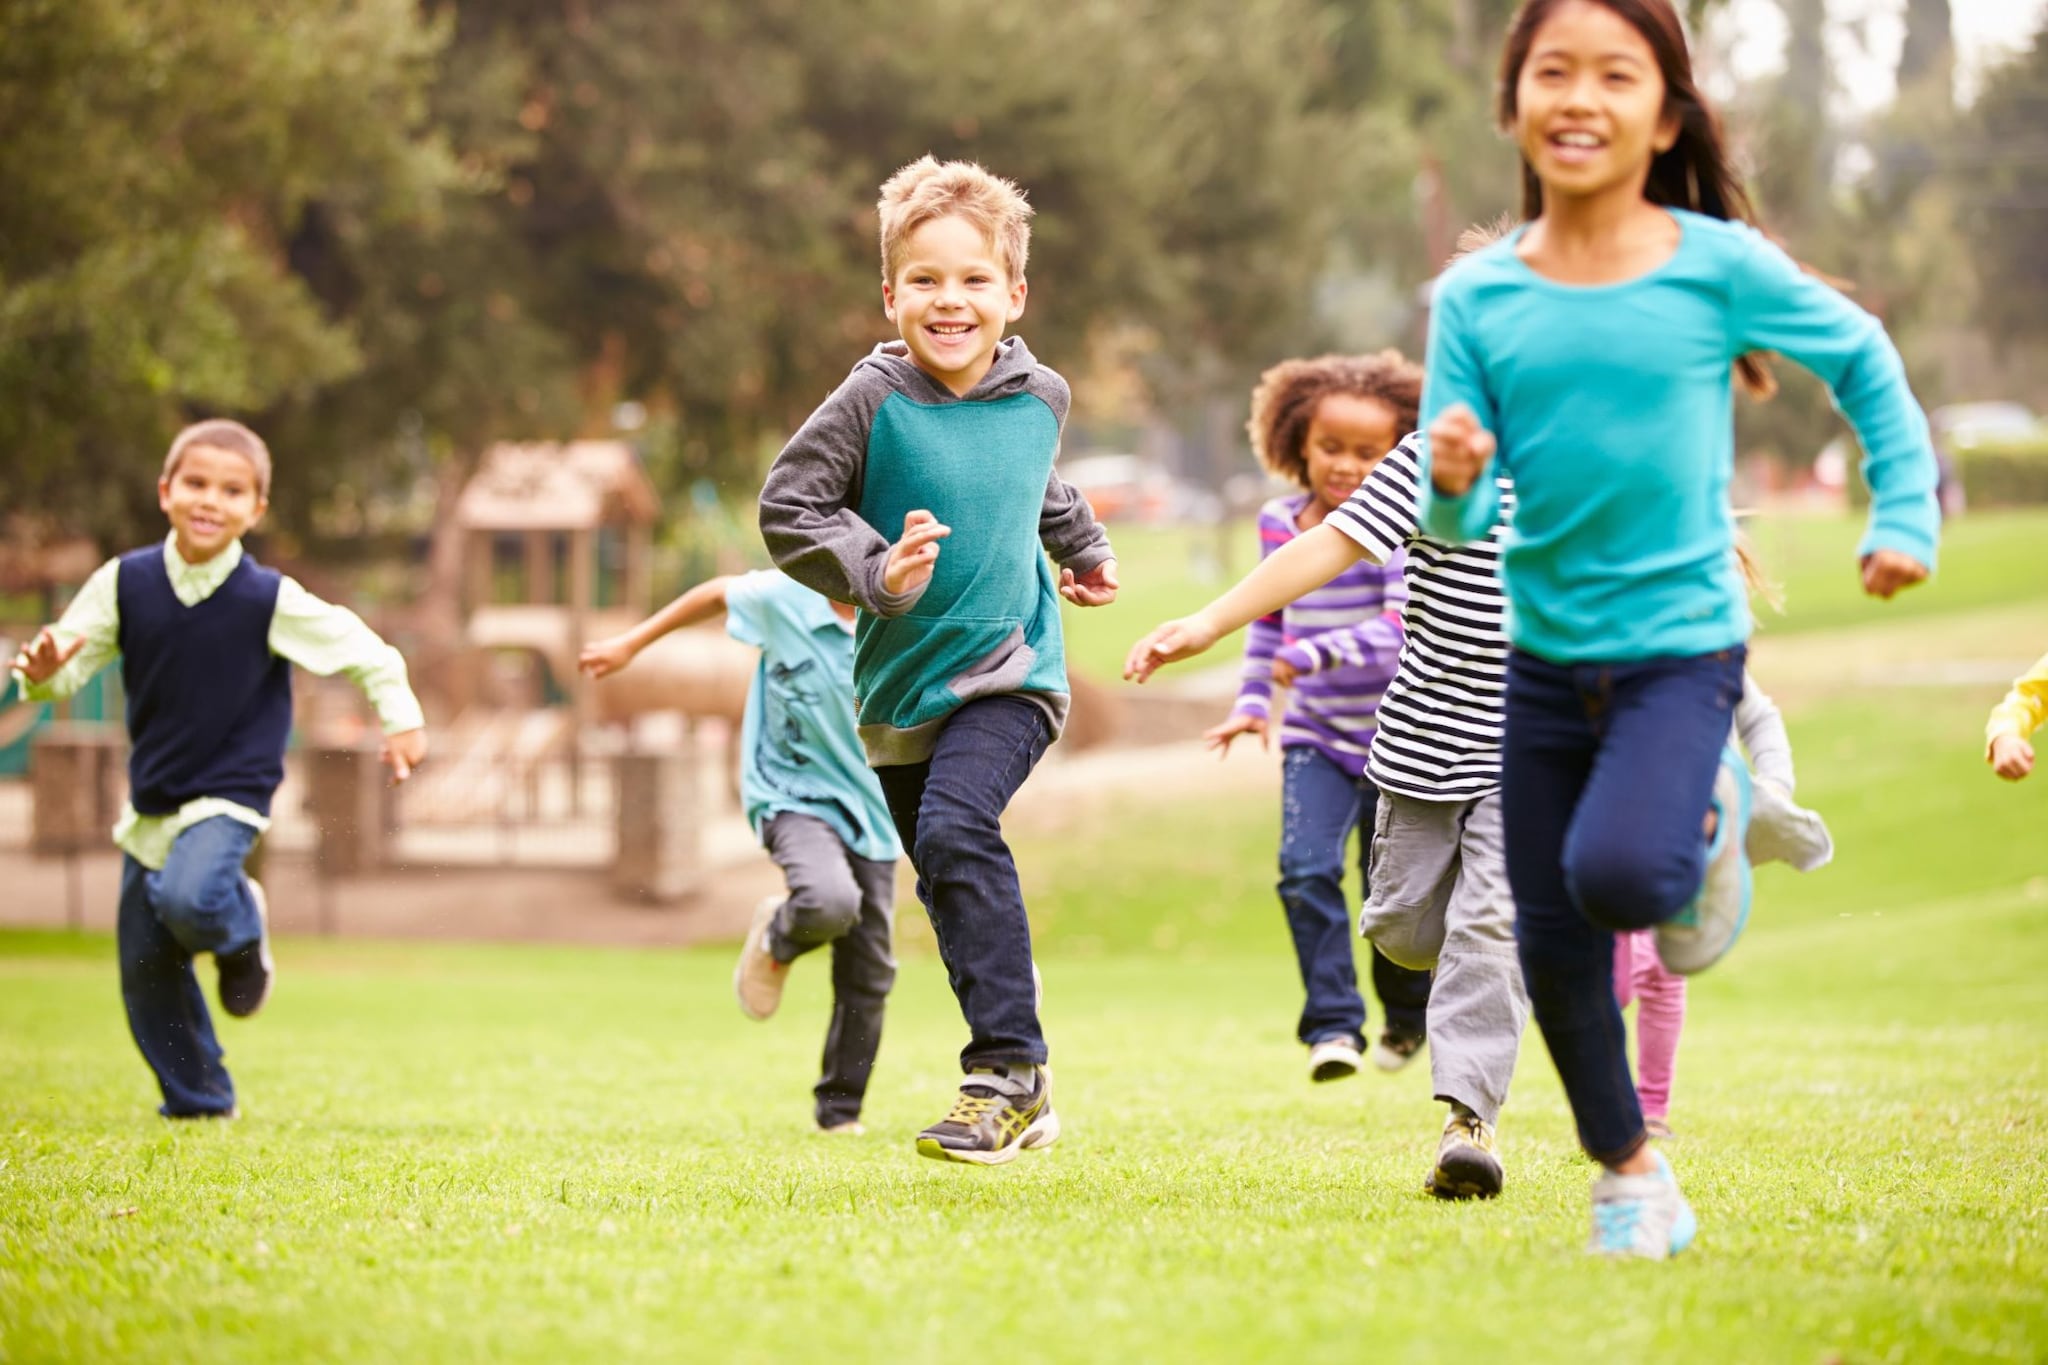 How much physical activity do children need? | Physical Activity | DNPAO |  CDC